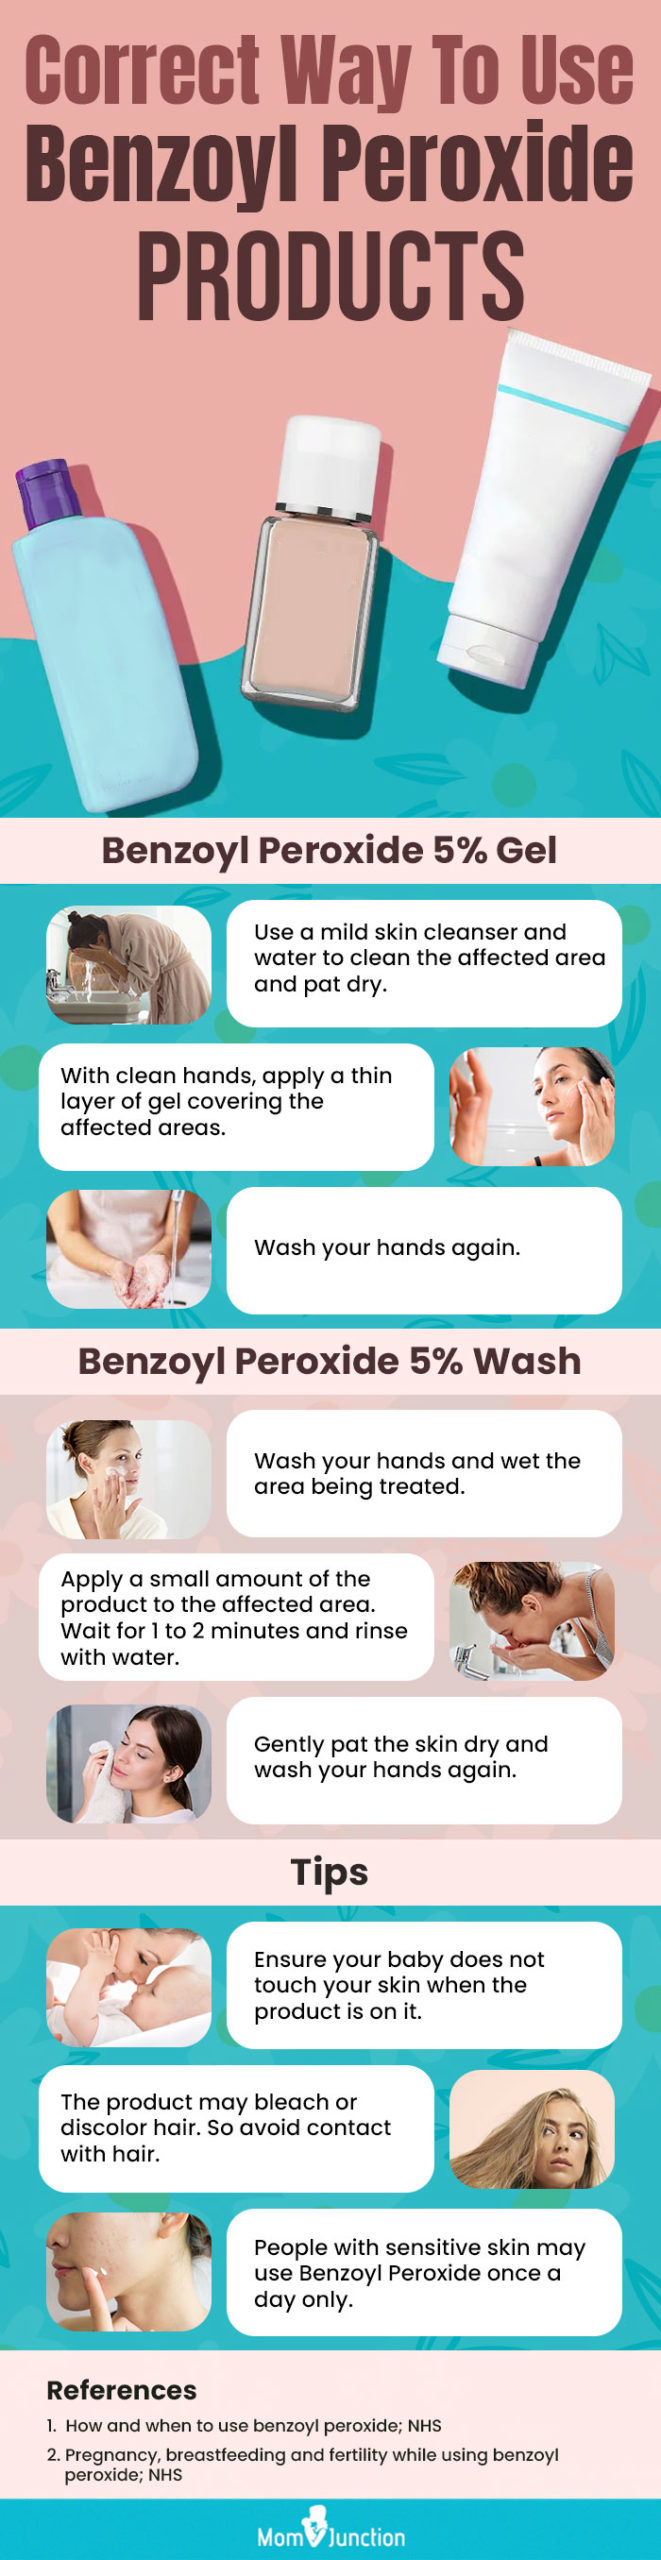 how to use benzoyl peroxide (infographic)